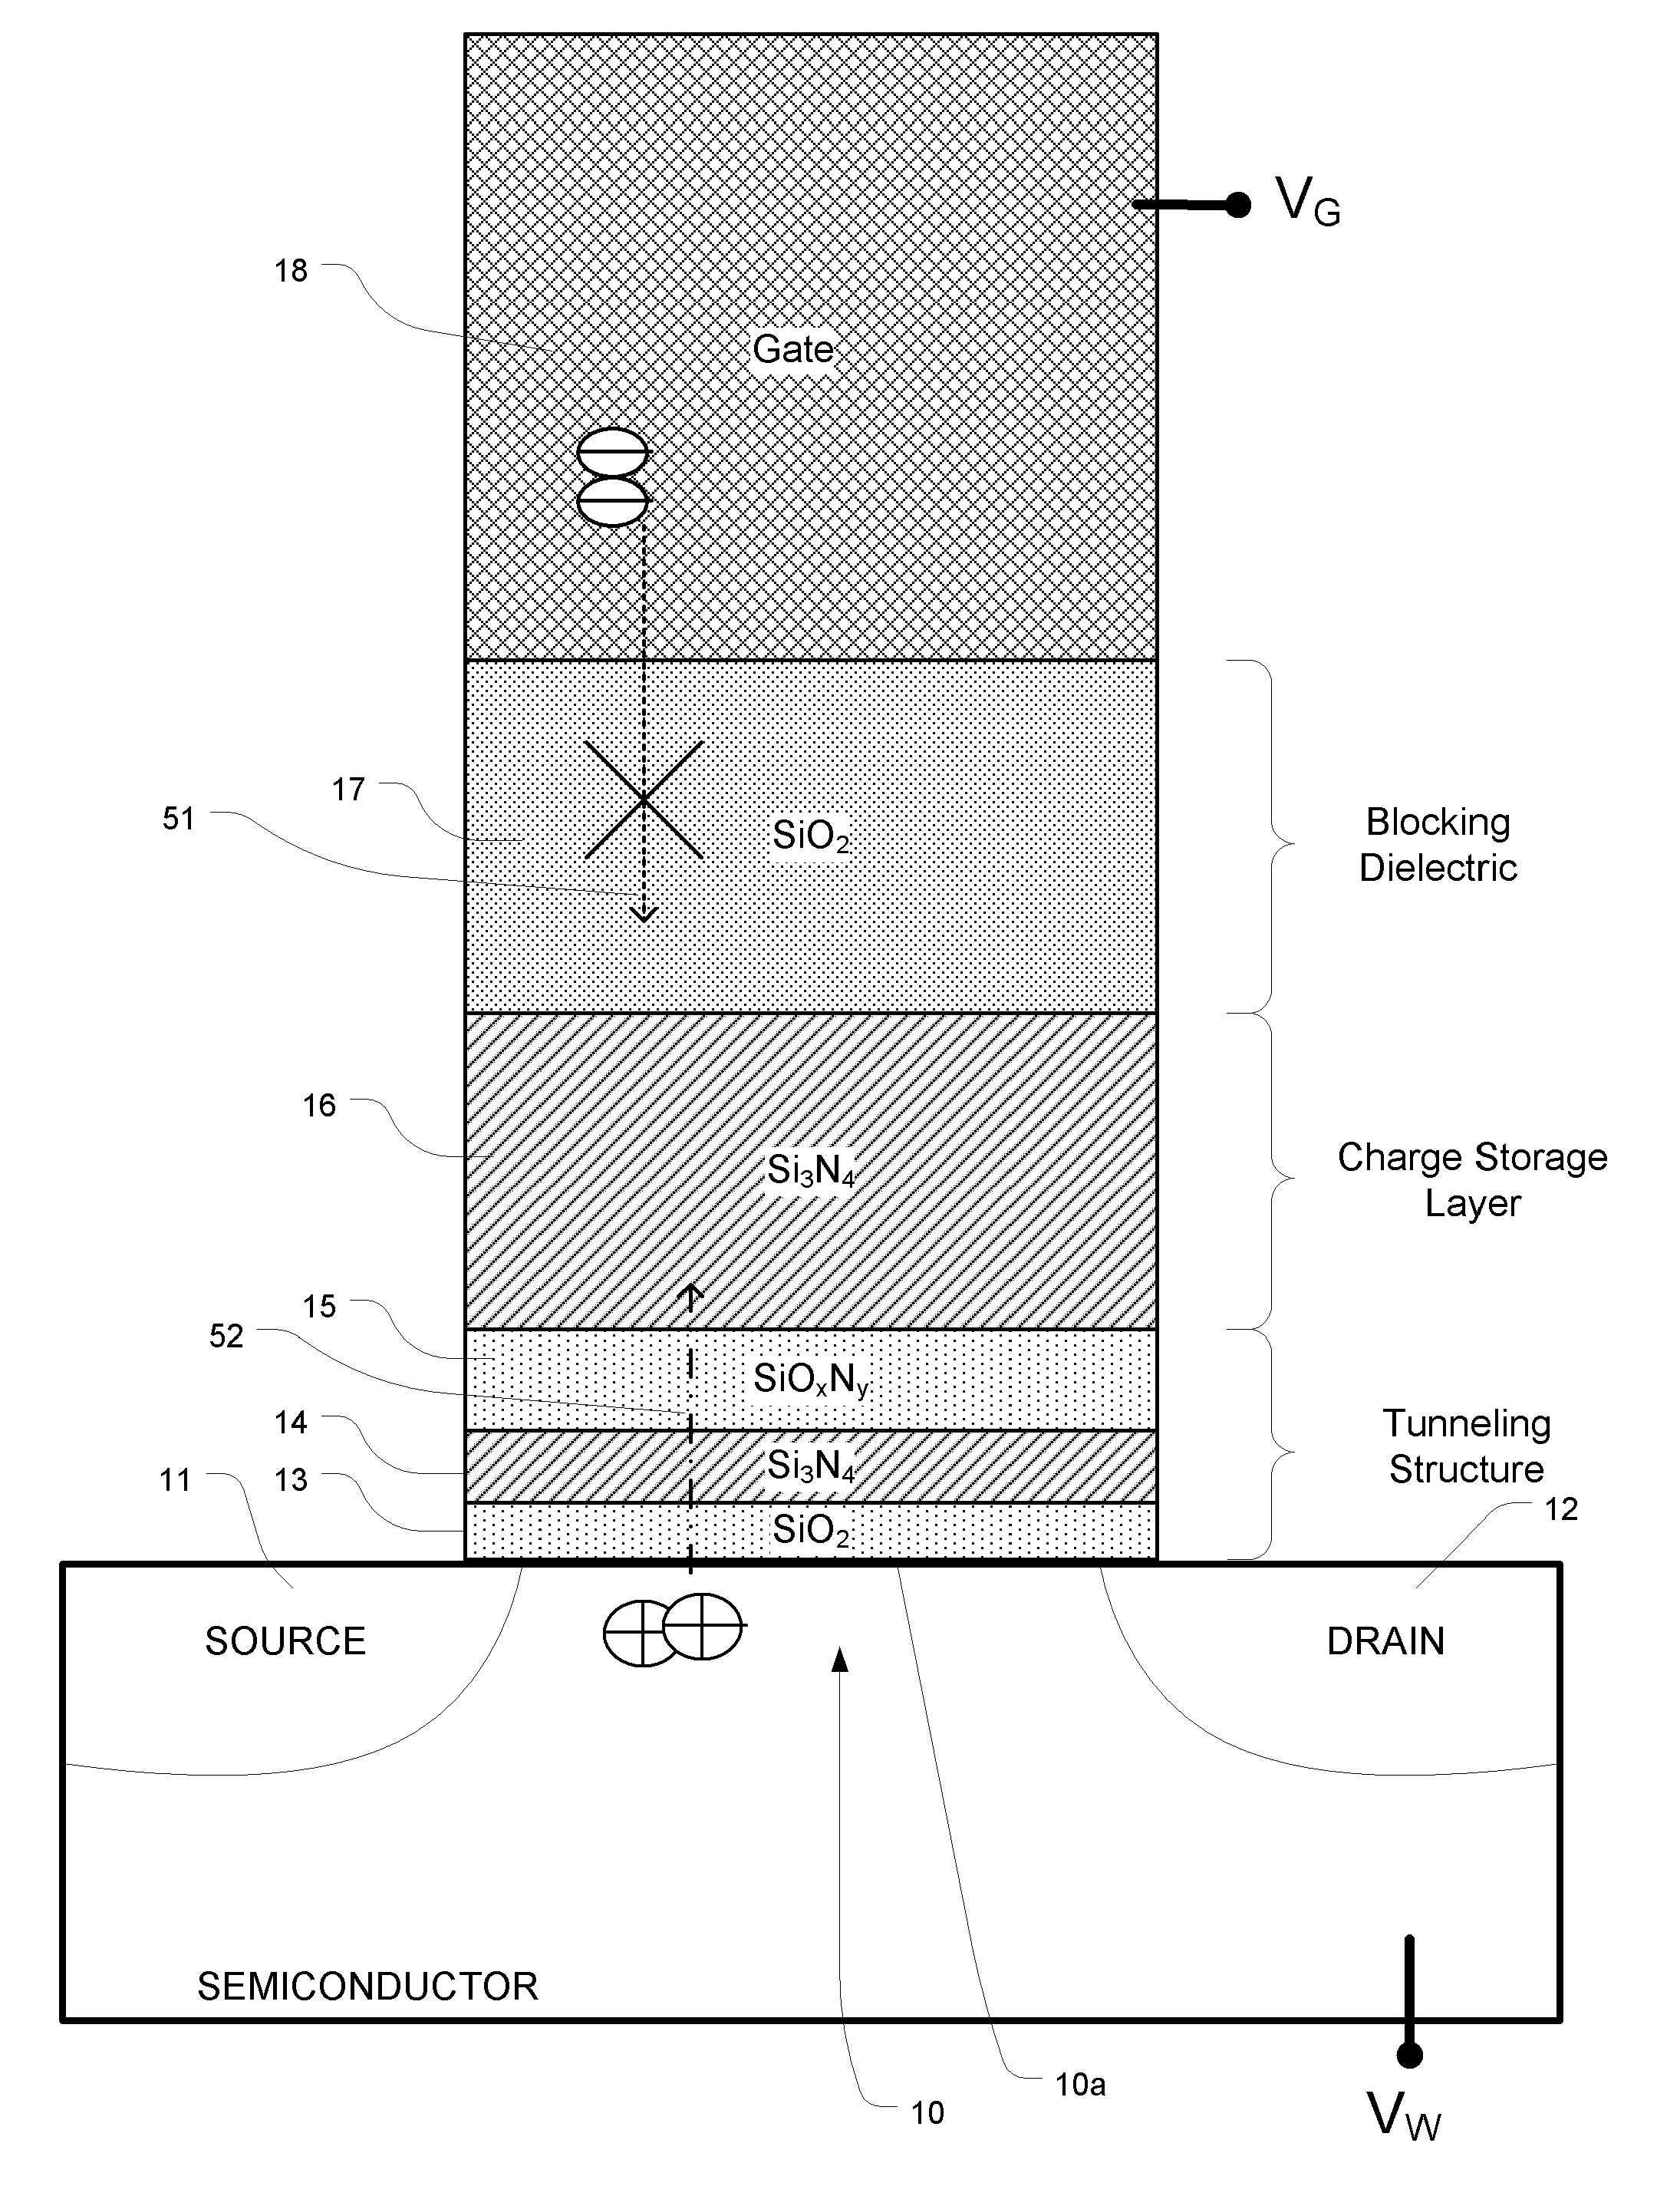 Charge trapping memory cell having bandgap engineered tunneling structure with oxynitride isolation layer